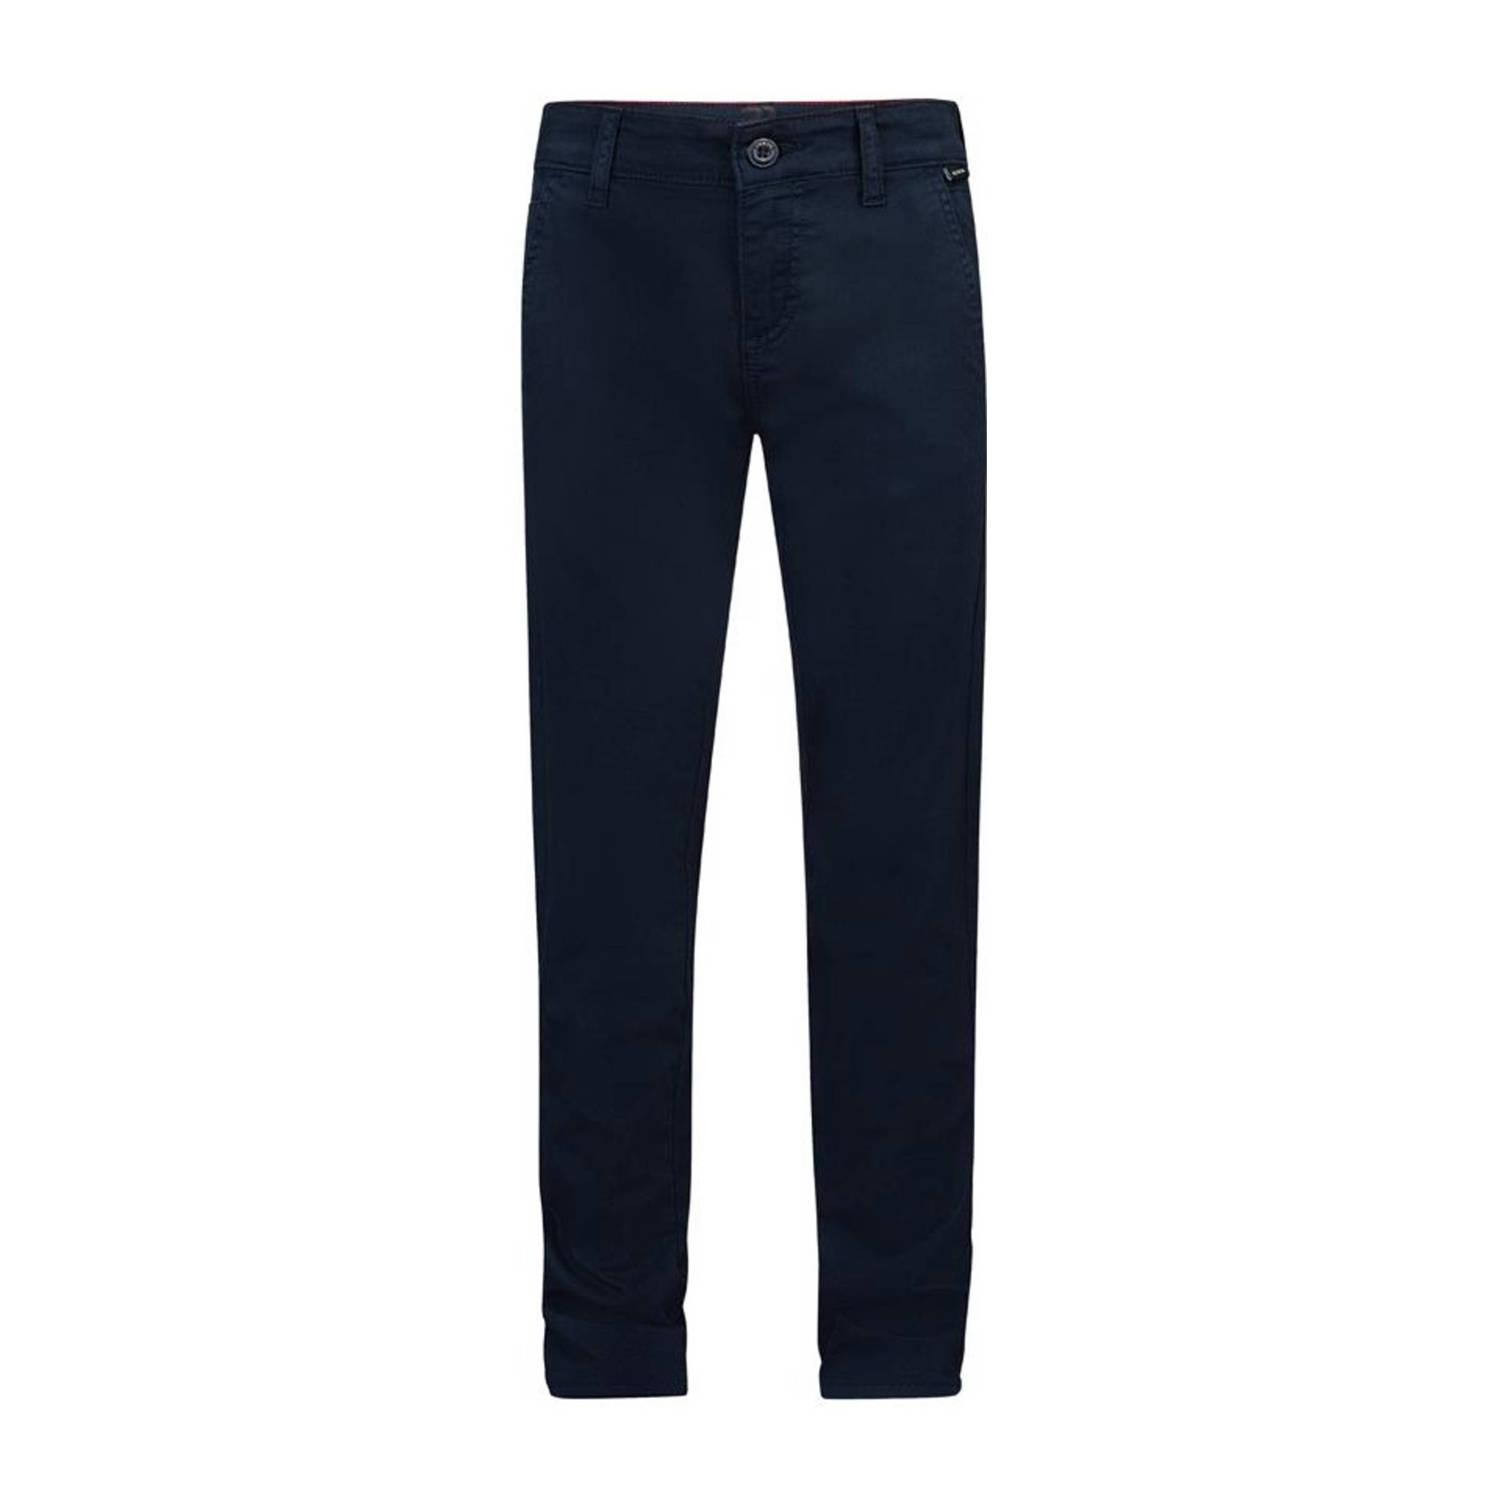 Retour Jeans tapered fit broek Cas donkerblauw